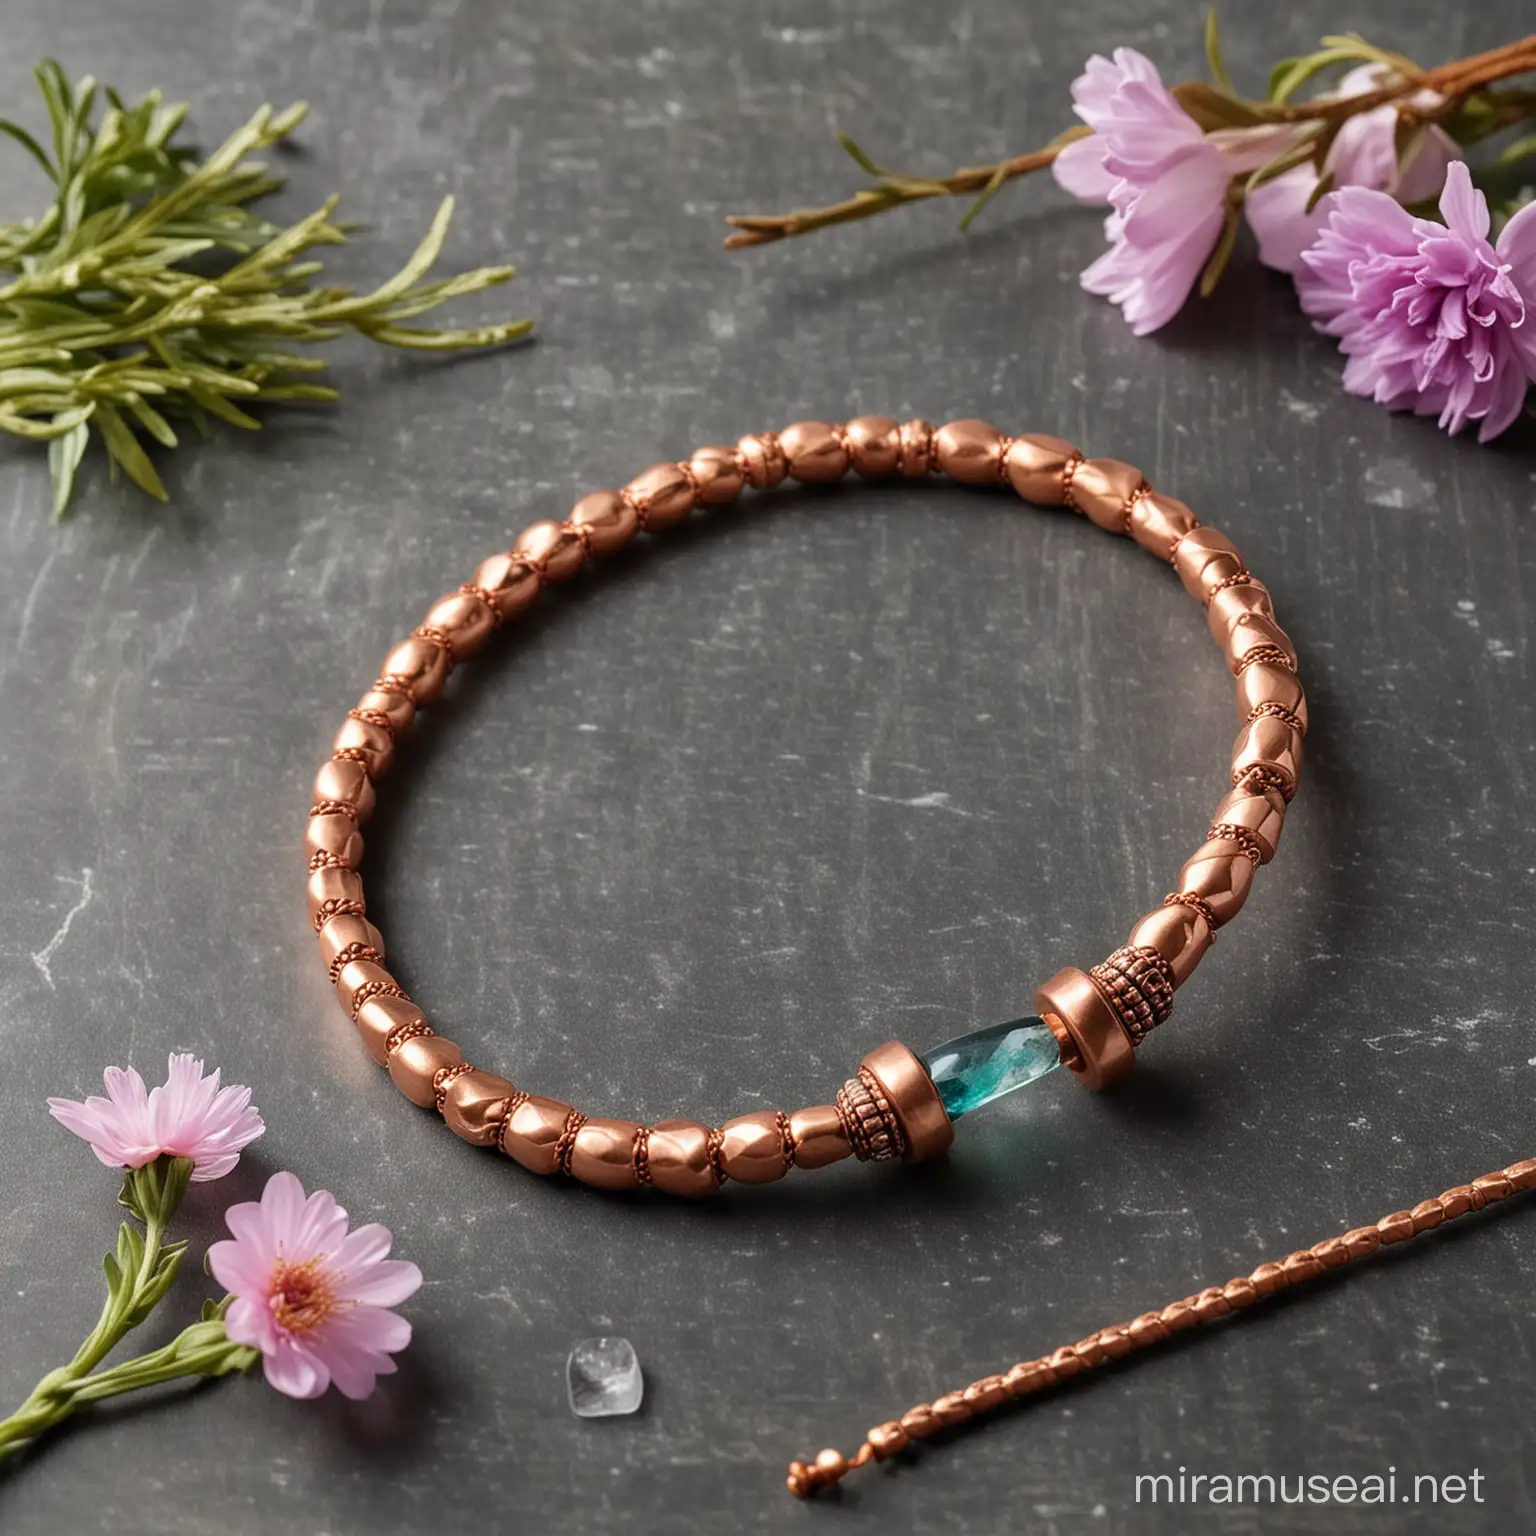 Copper Magnet Bracelet with Quartz Crystal Incense and Blooming Flowers